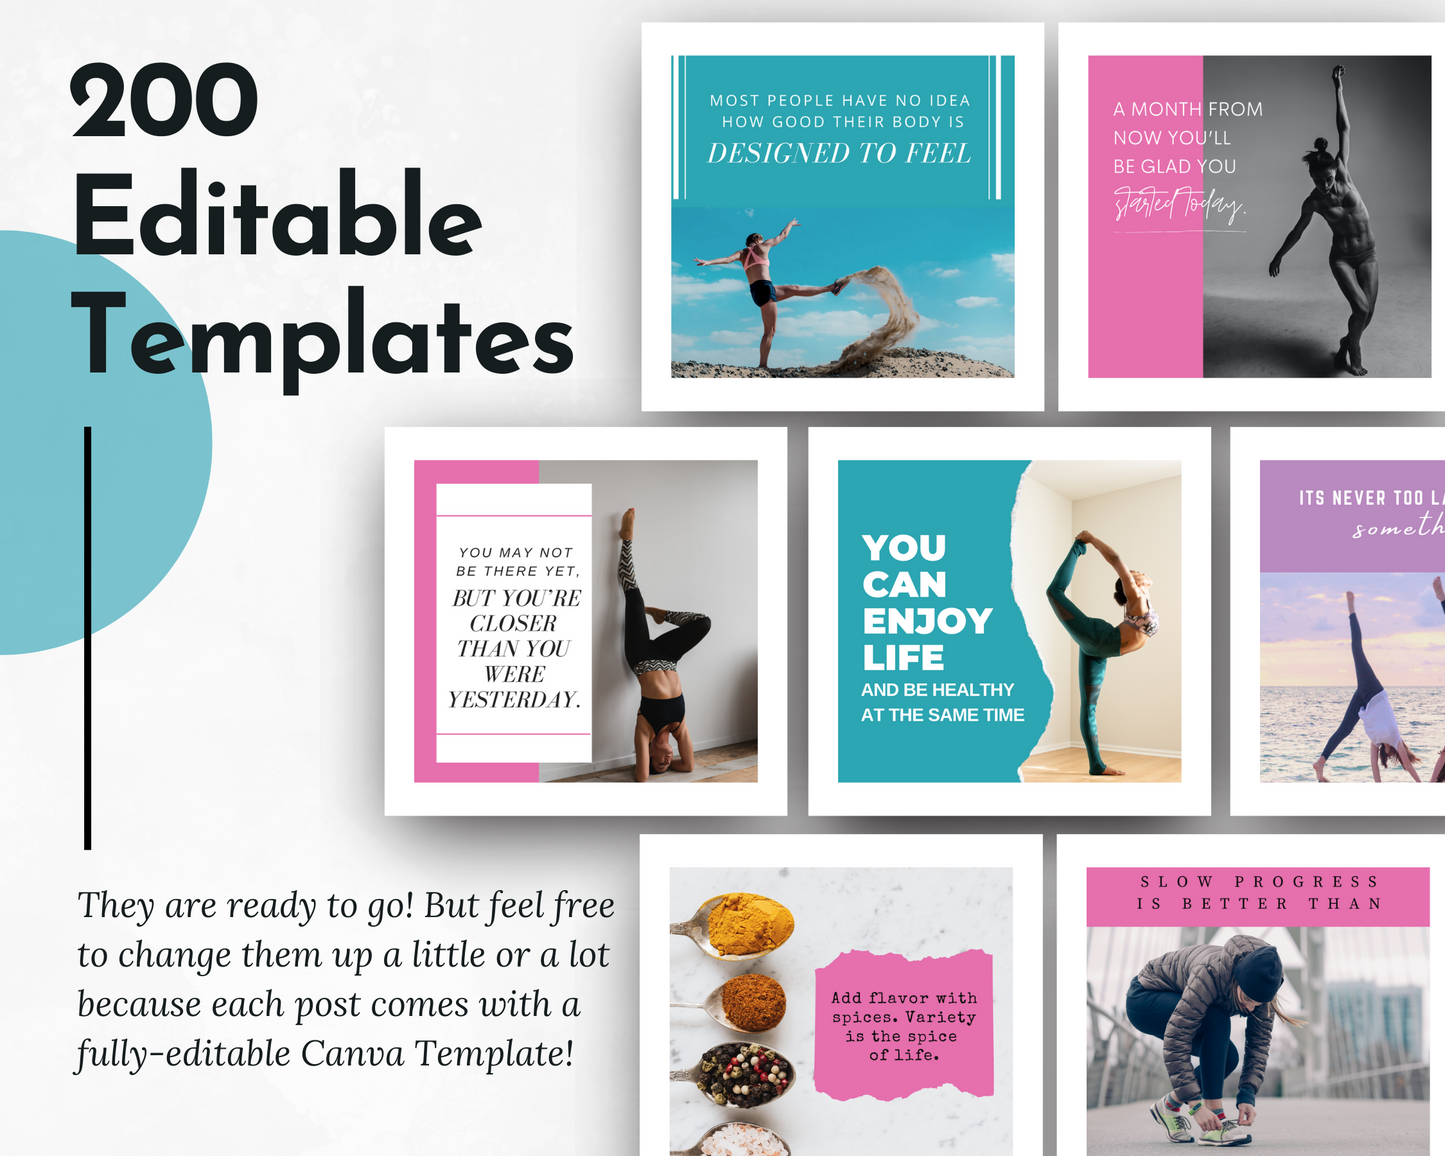 200 editable Instagram templates from the Fitness & Wellness Social Media Post Bundle with Canva Templates by Socially Inclined for fitness coaches and health and fitness social media.